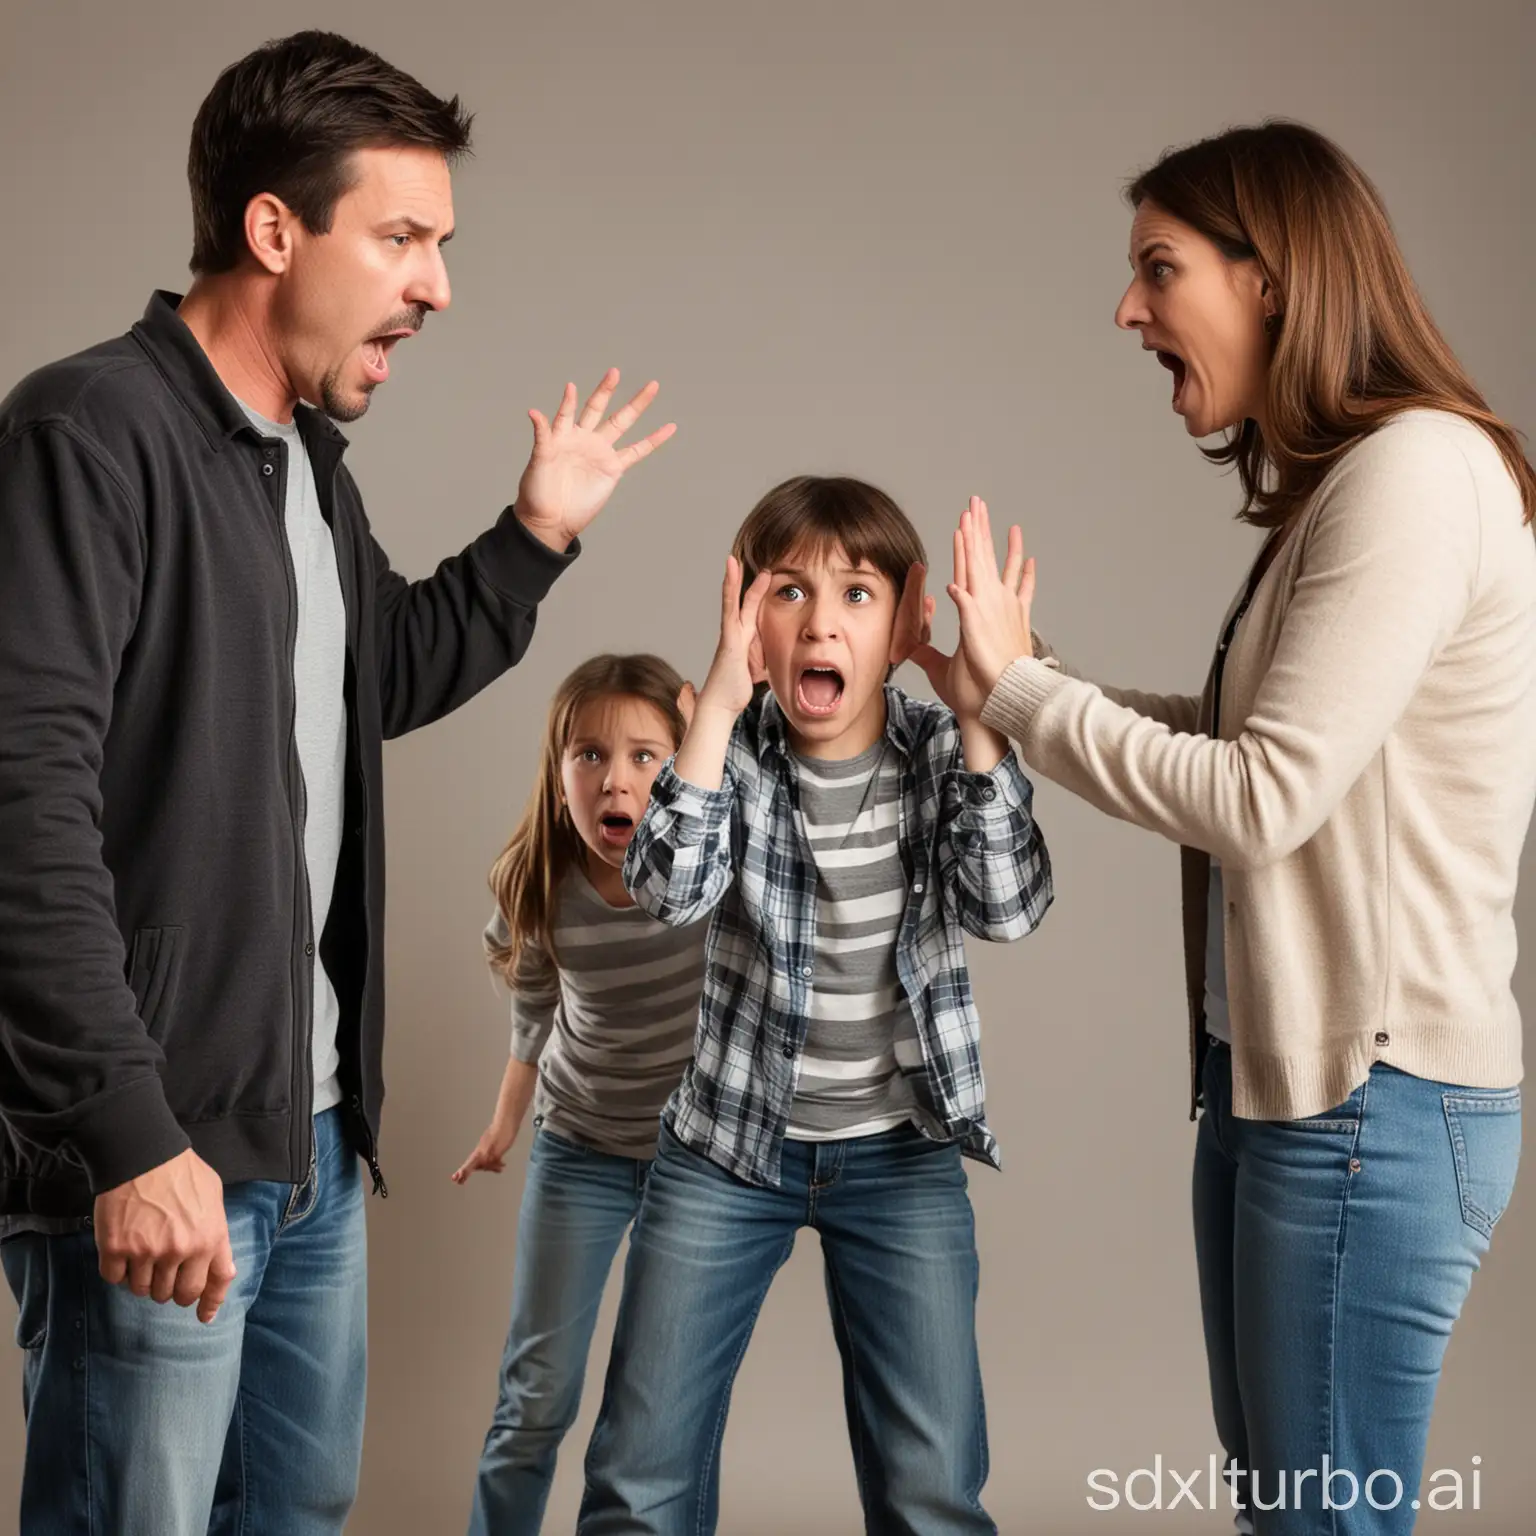 Arguing parents with a frightened child in the middle.
The father on the left, the mother on the right.
The child is an 11-year-old boy.